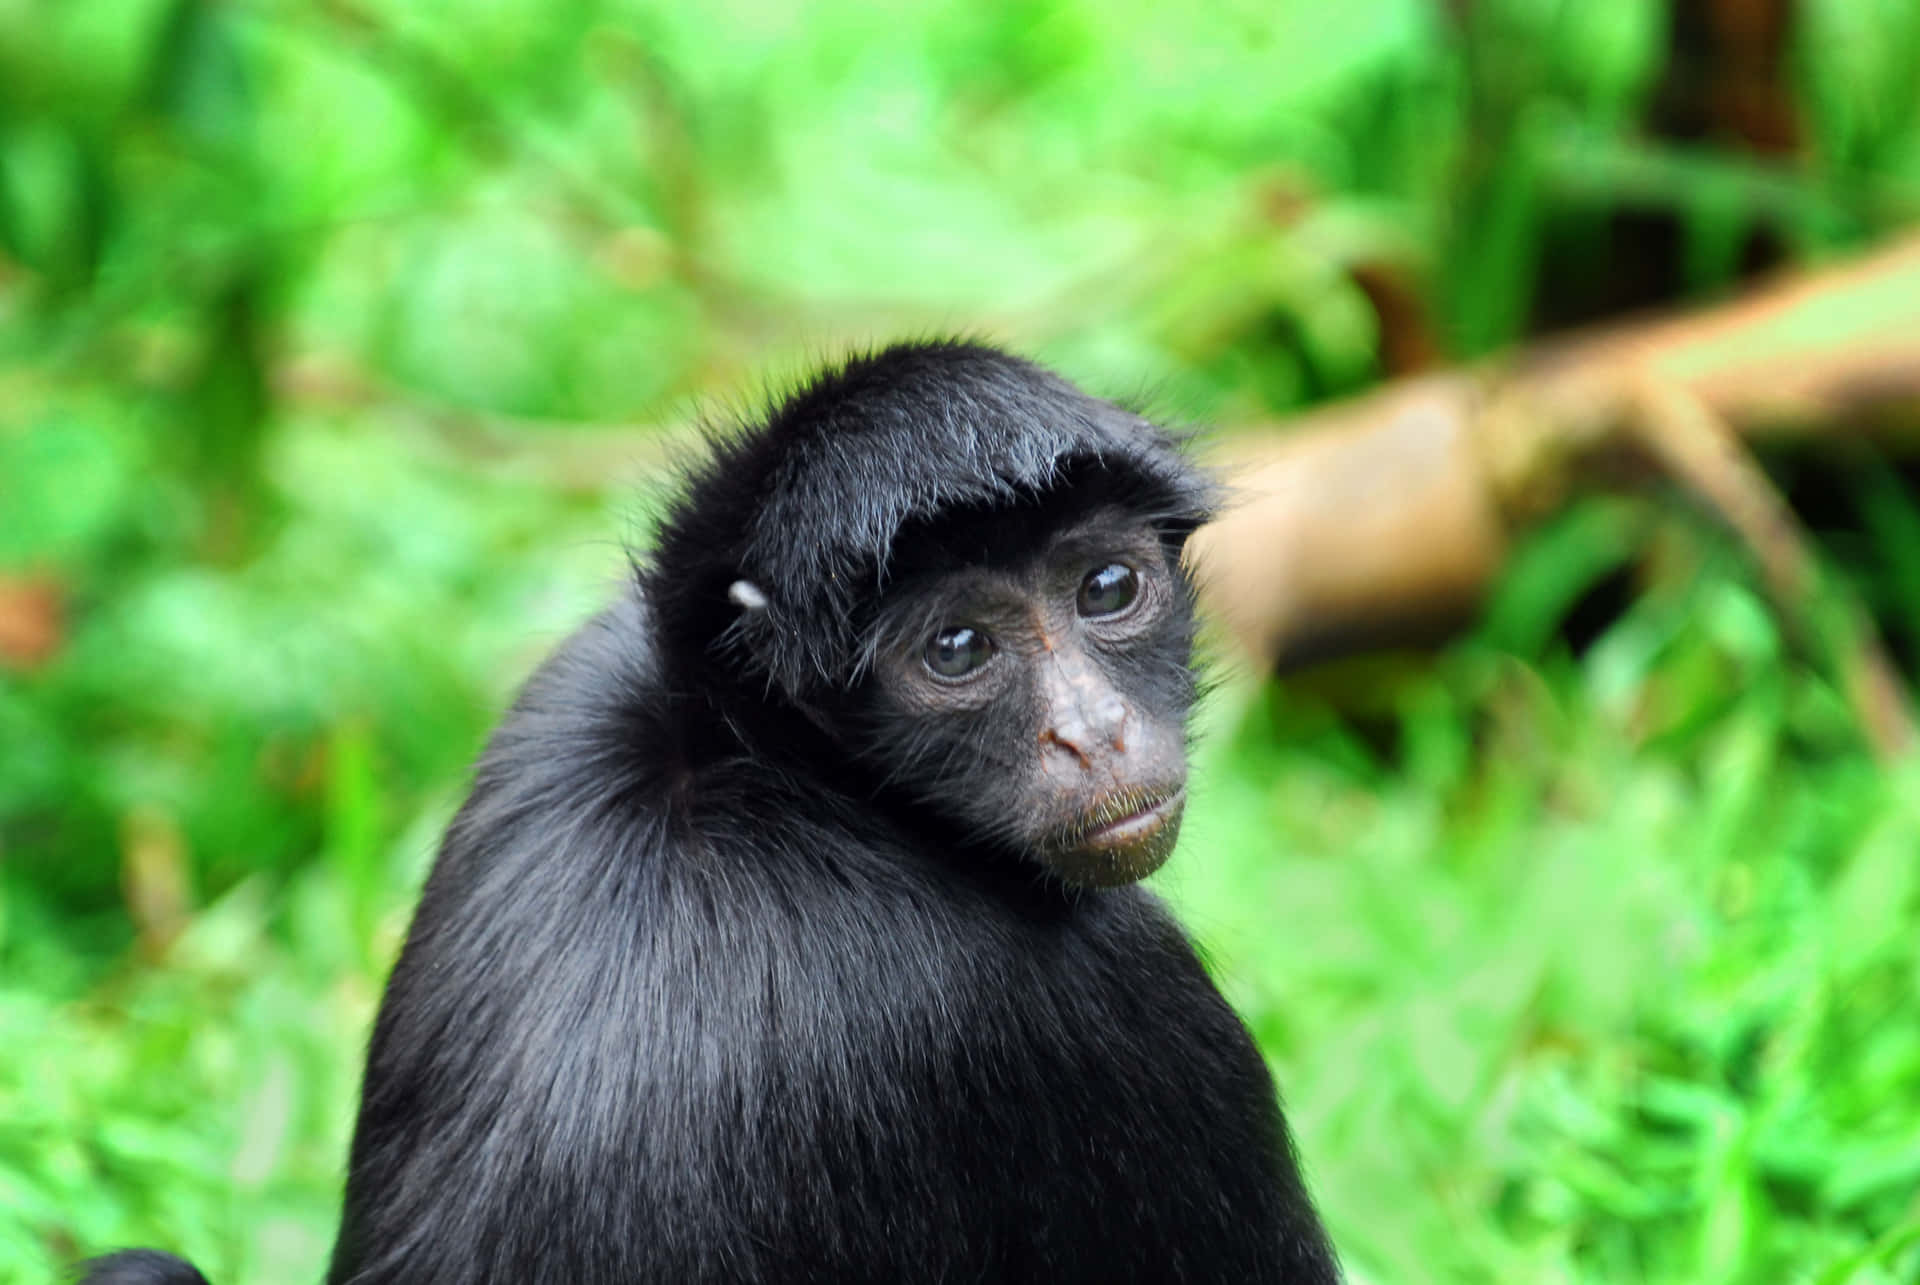 Baby Black Monkey Green Grass Picture